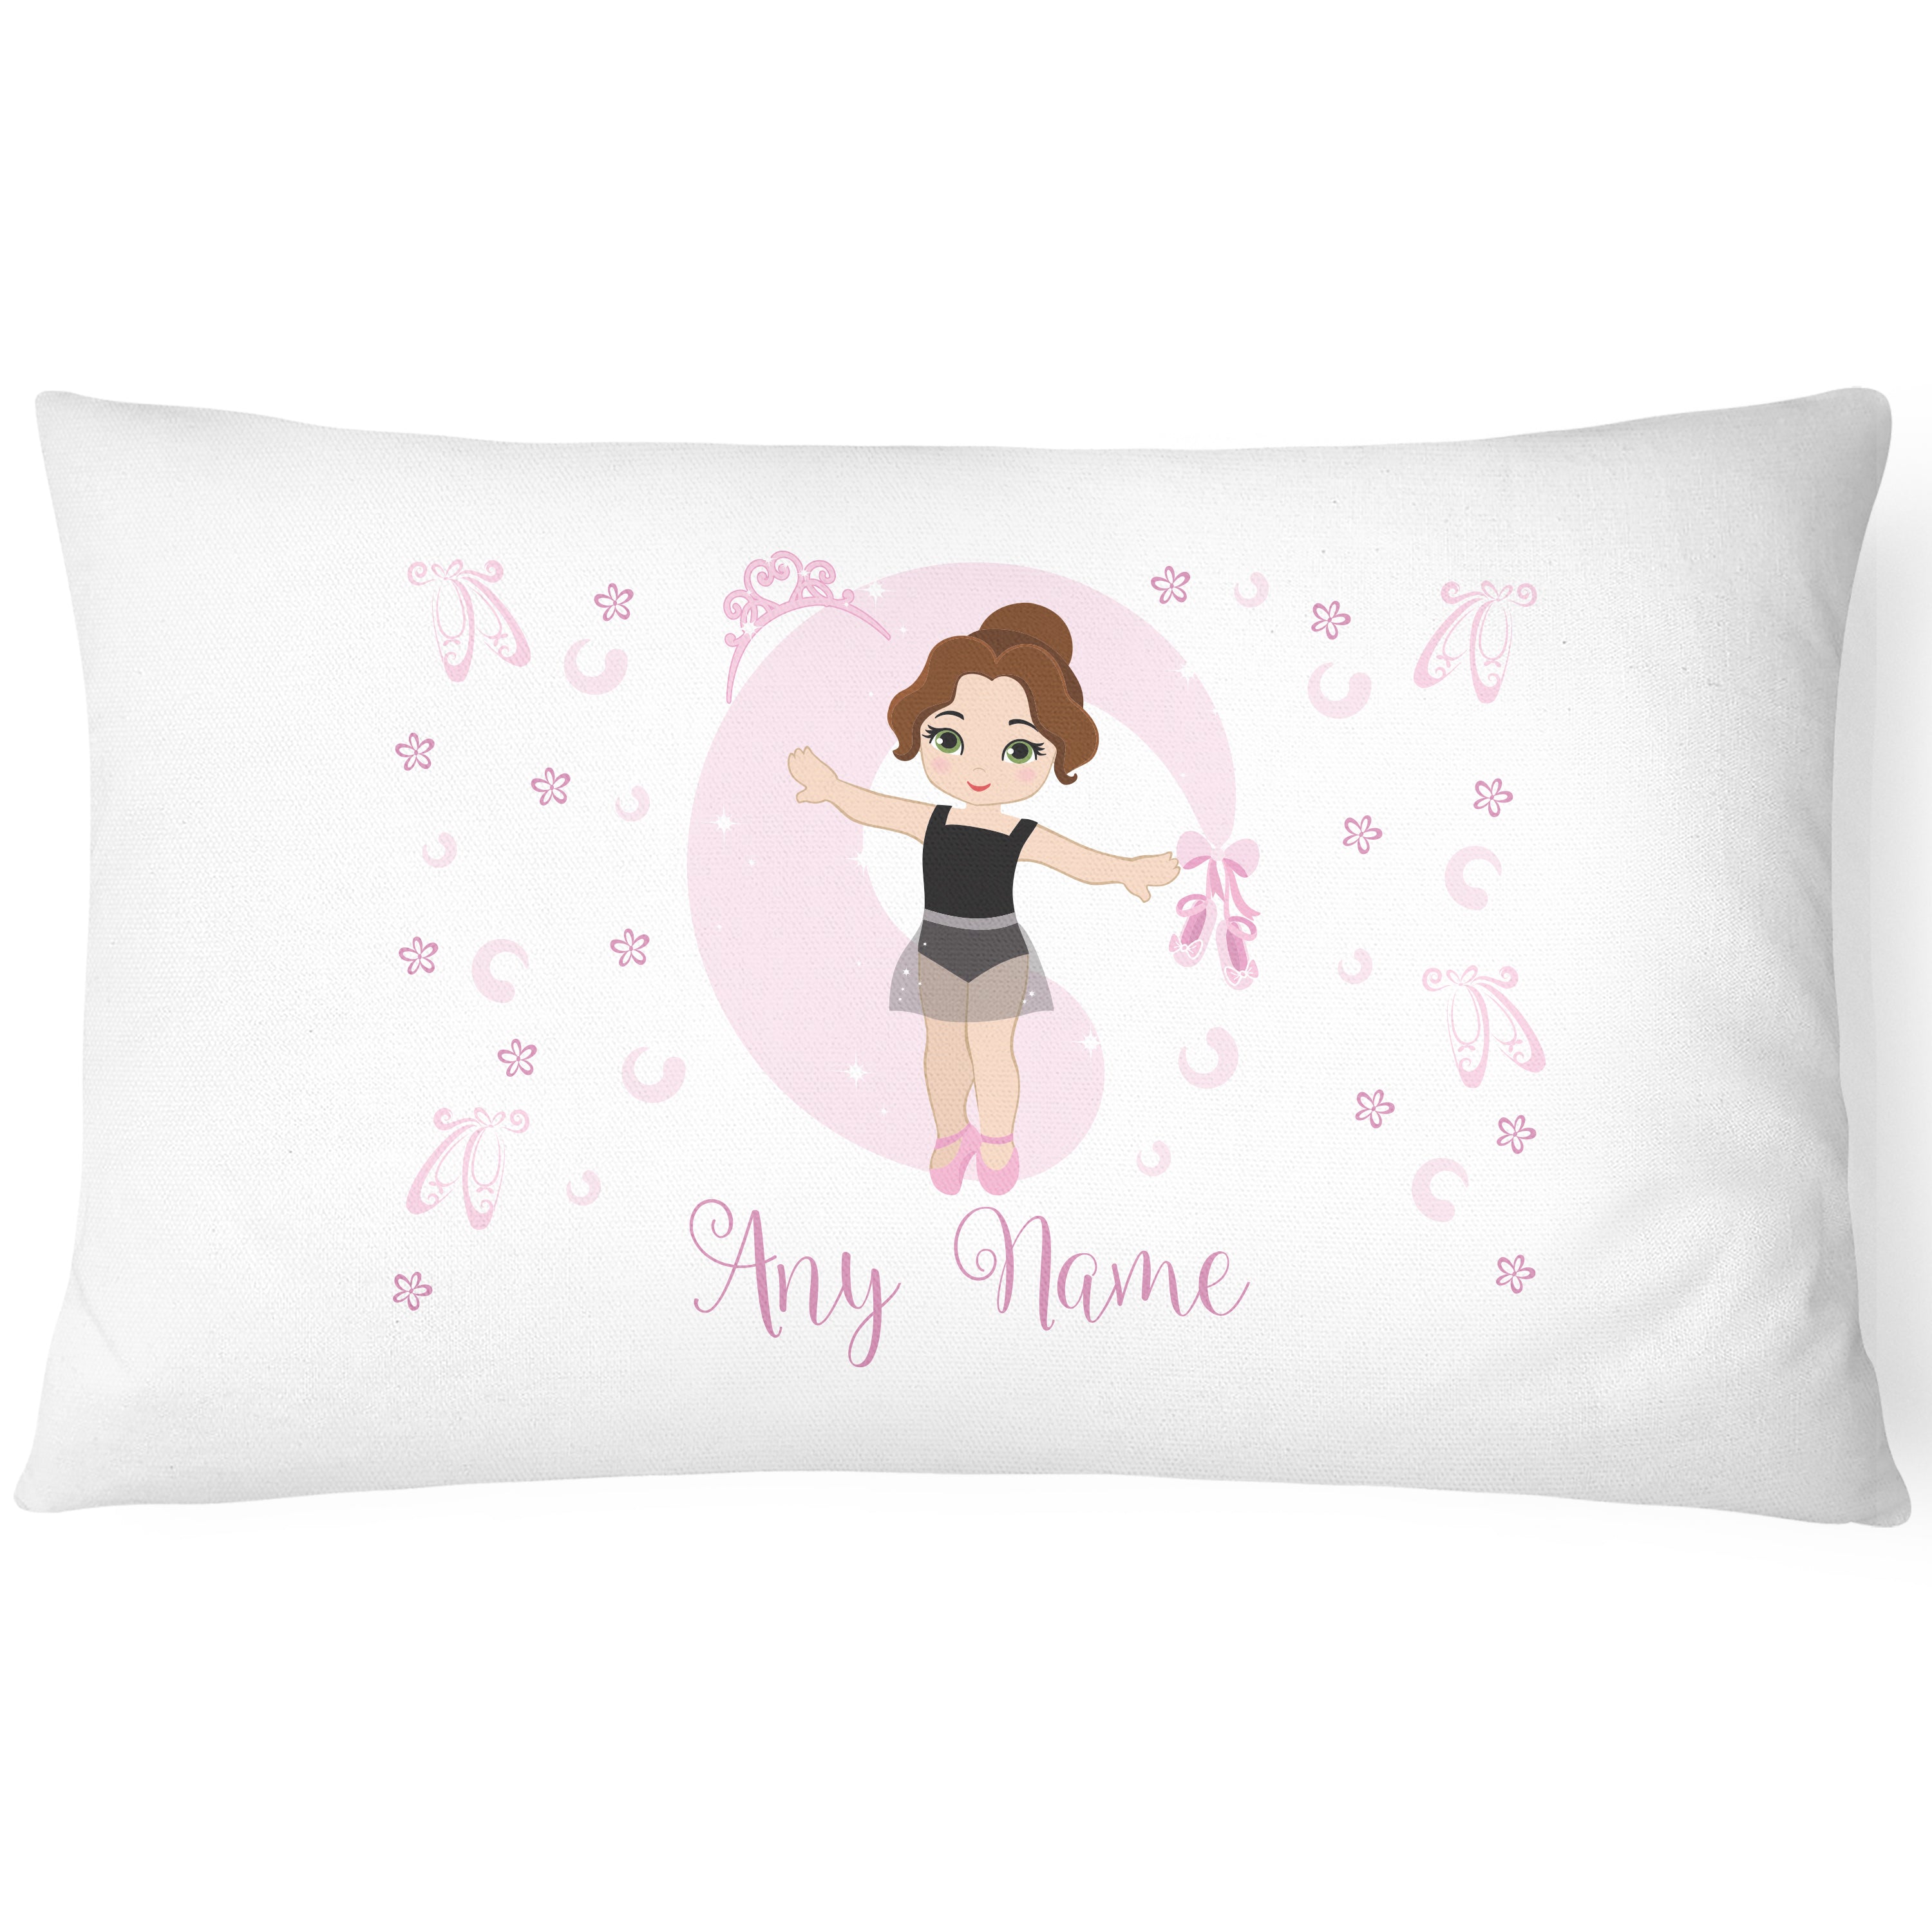 Ballerina Children's Pillowcase - Personalise with Any Name - Dancer